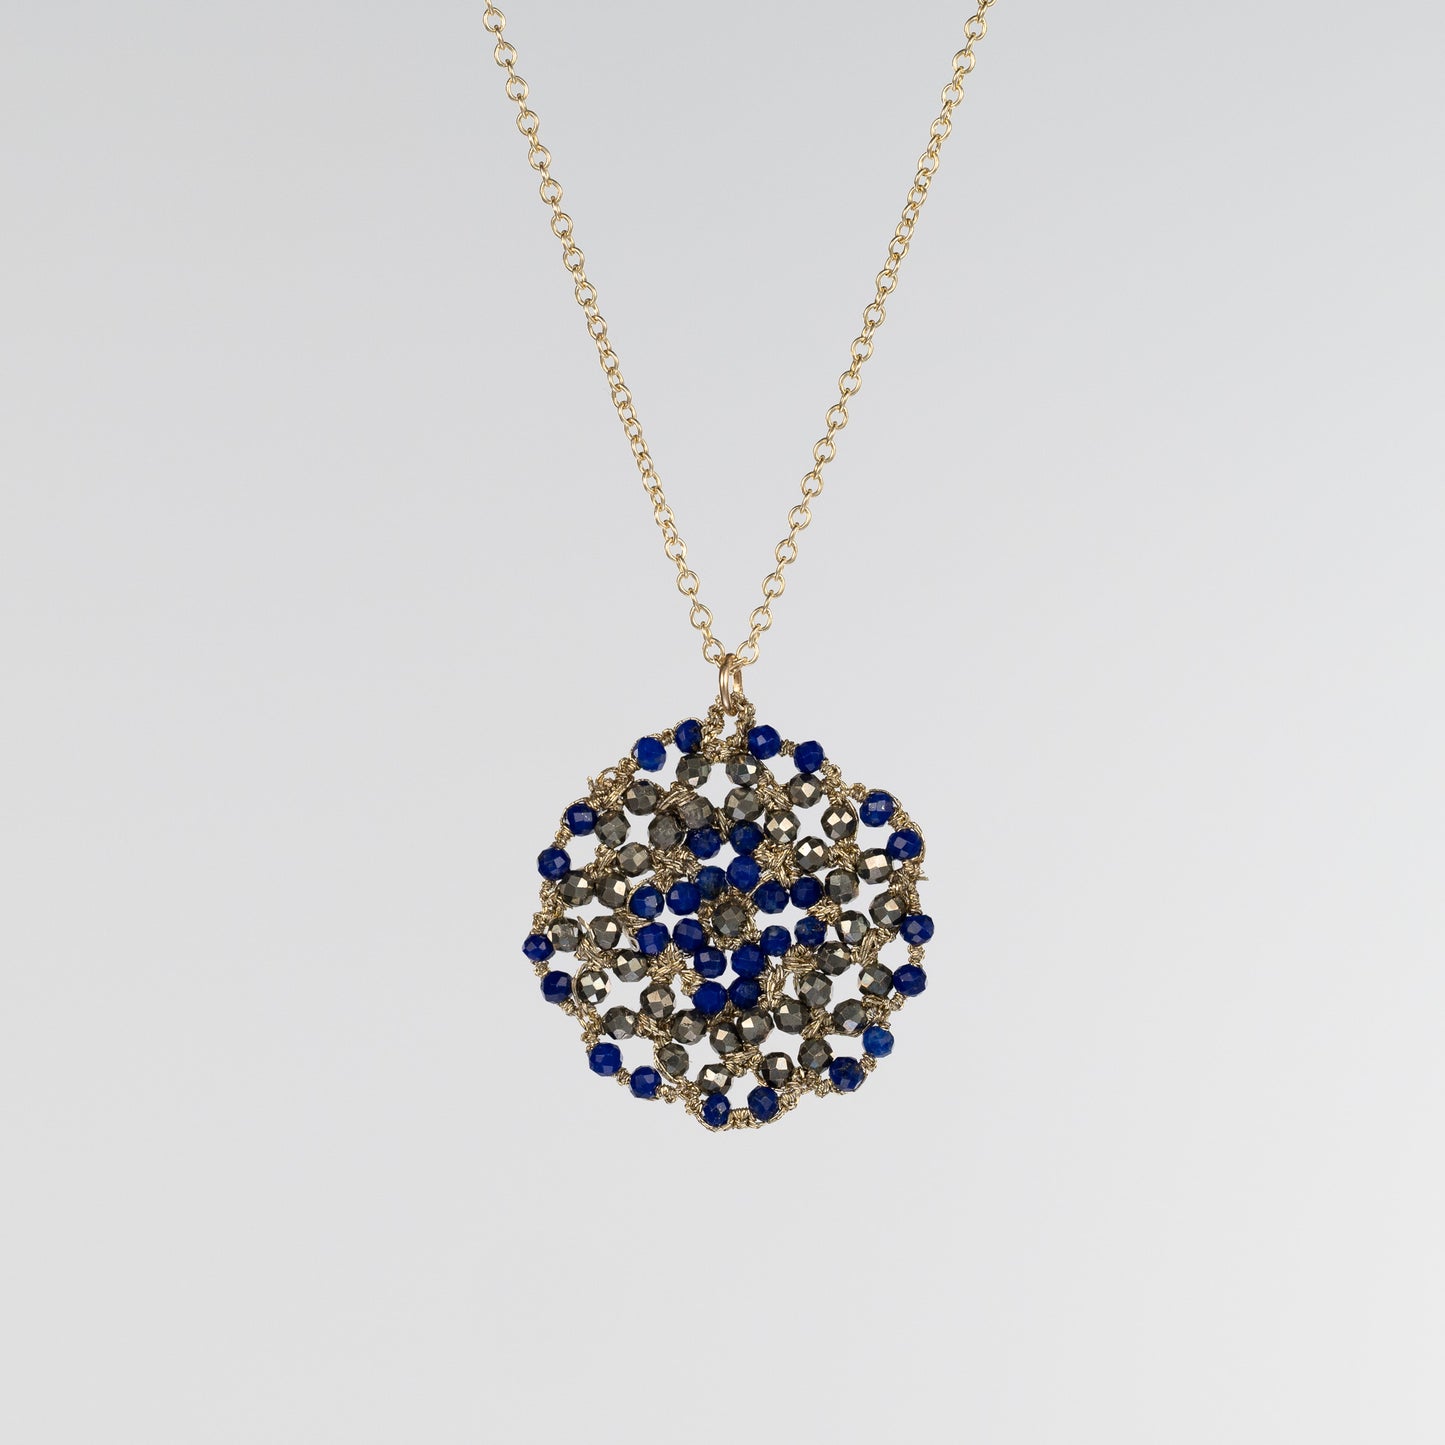 Danielle Welmond Woven Lapis and Pyrite Coin Necklace